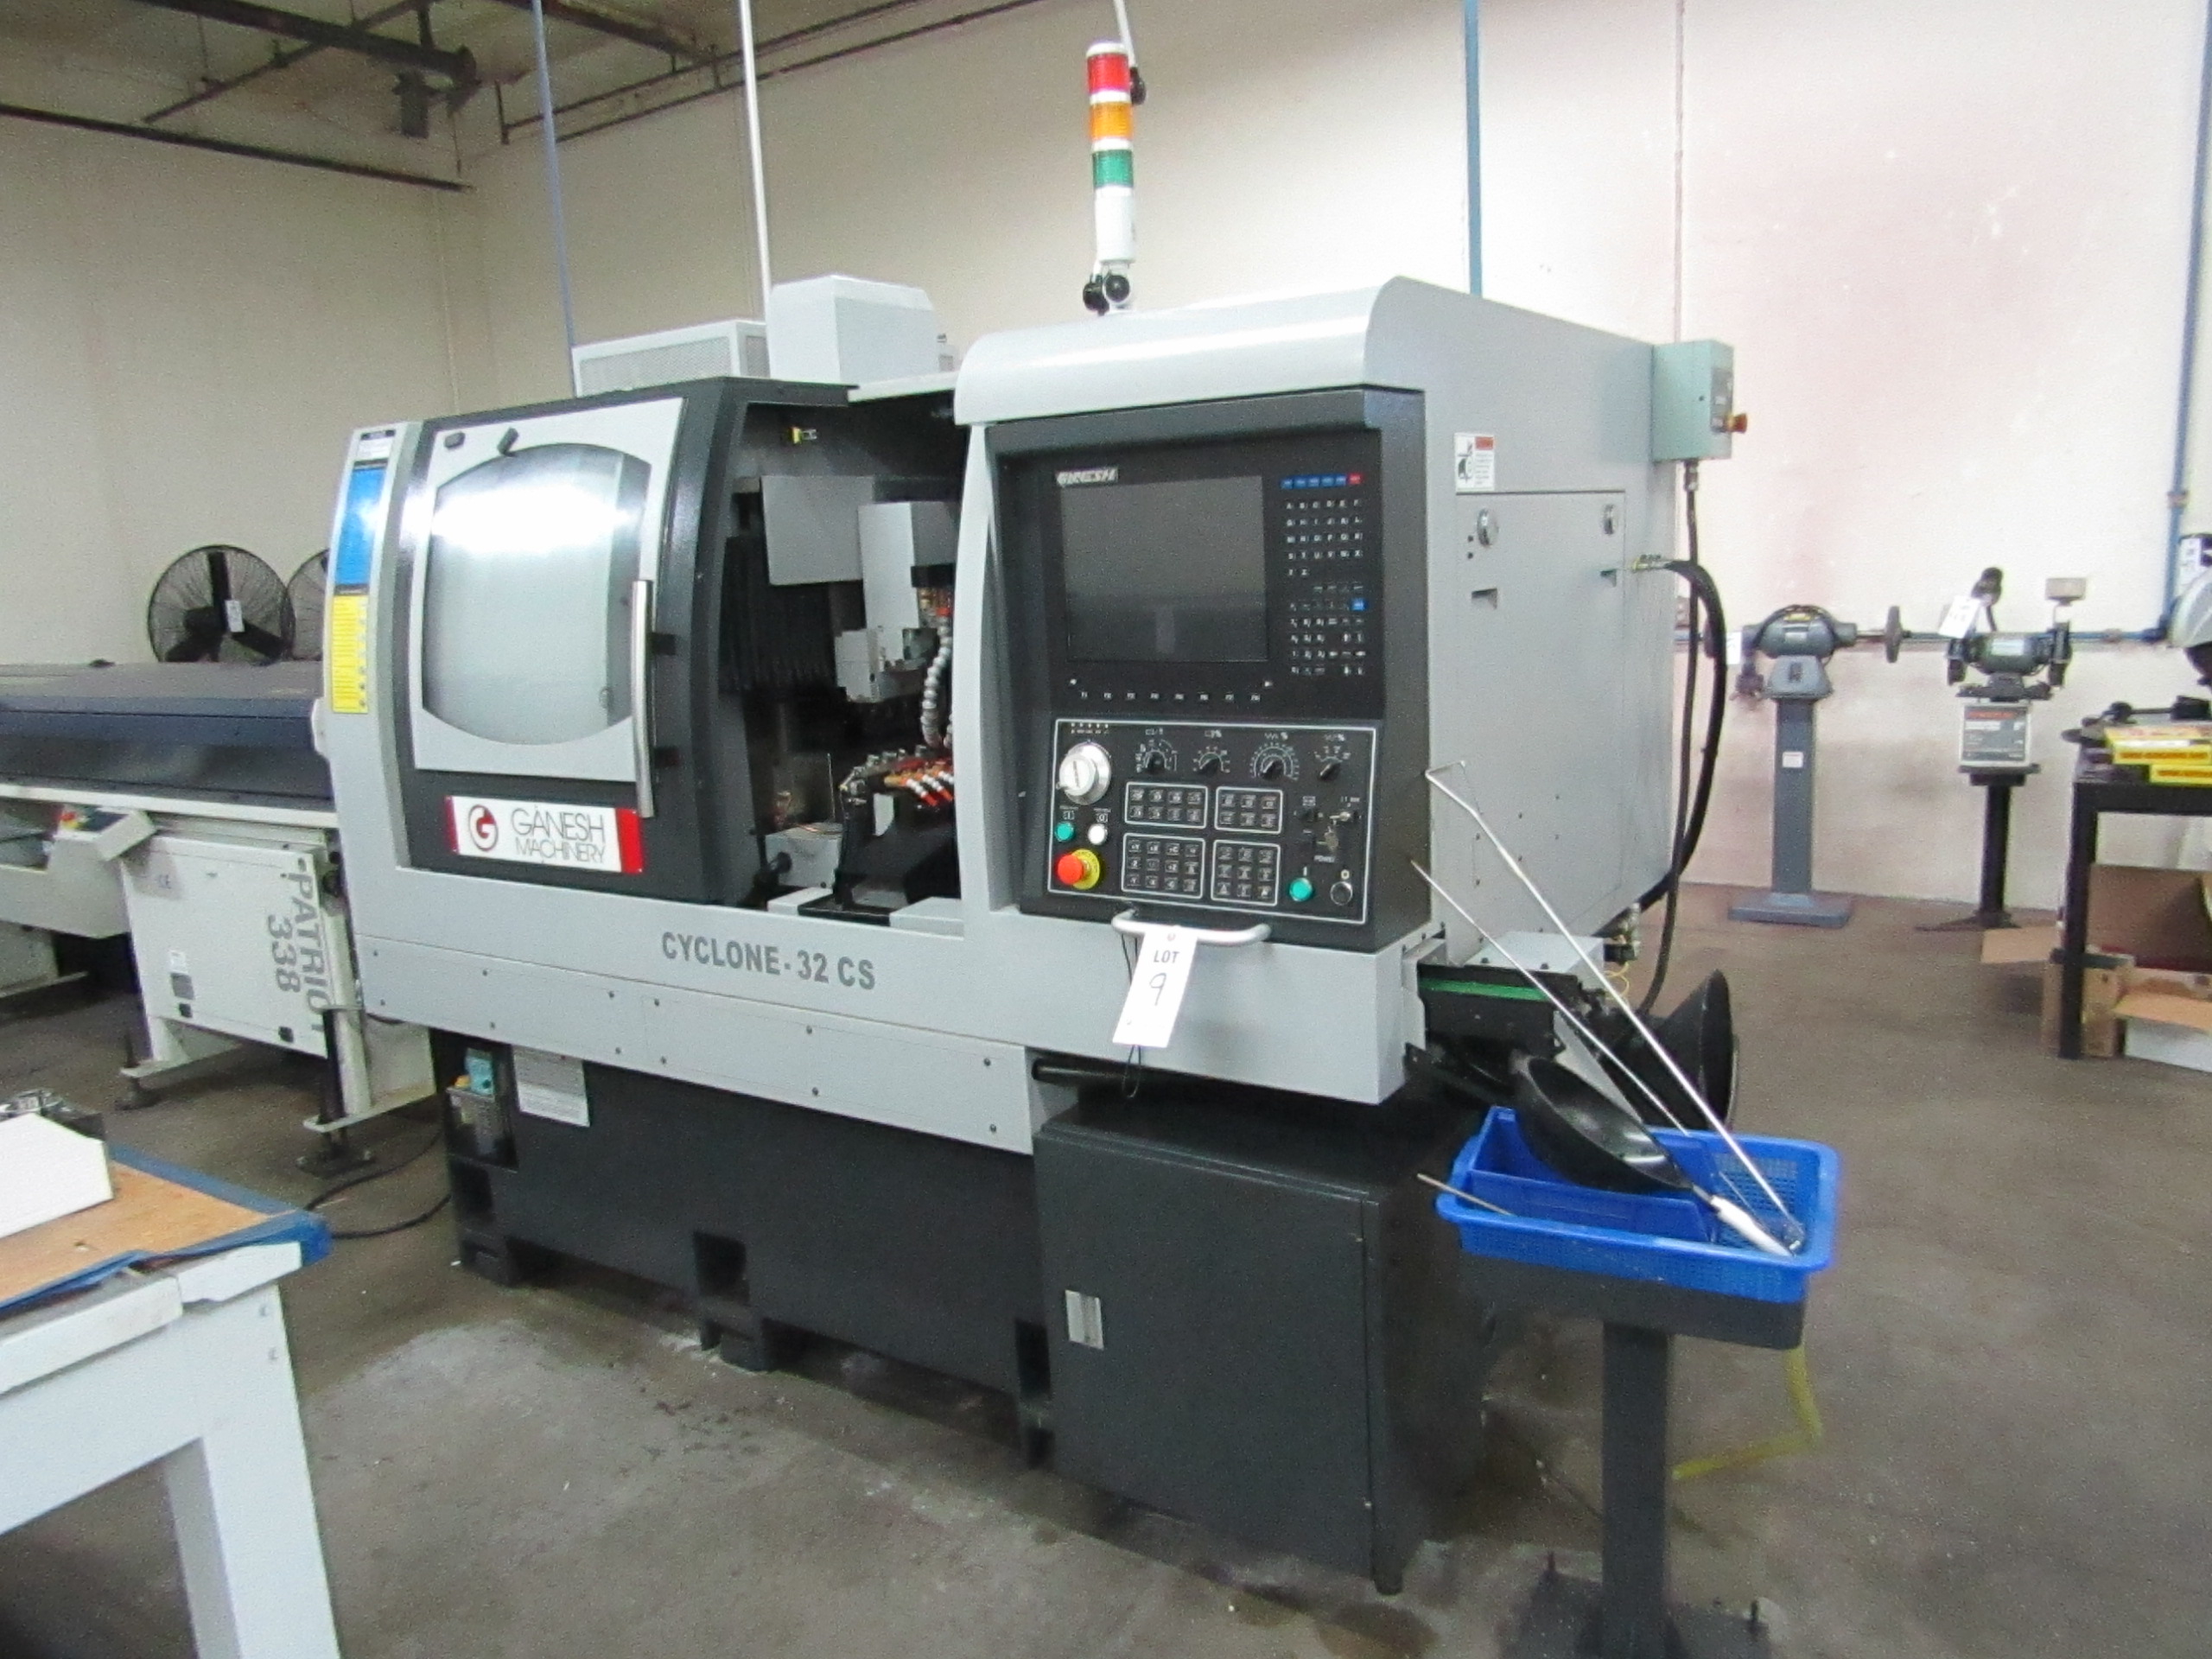 LATE-MODEL PRECISION CNC SWISS SHOP WITH ALL SUPPORT EQUIPMENT